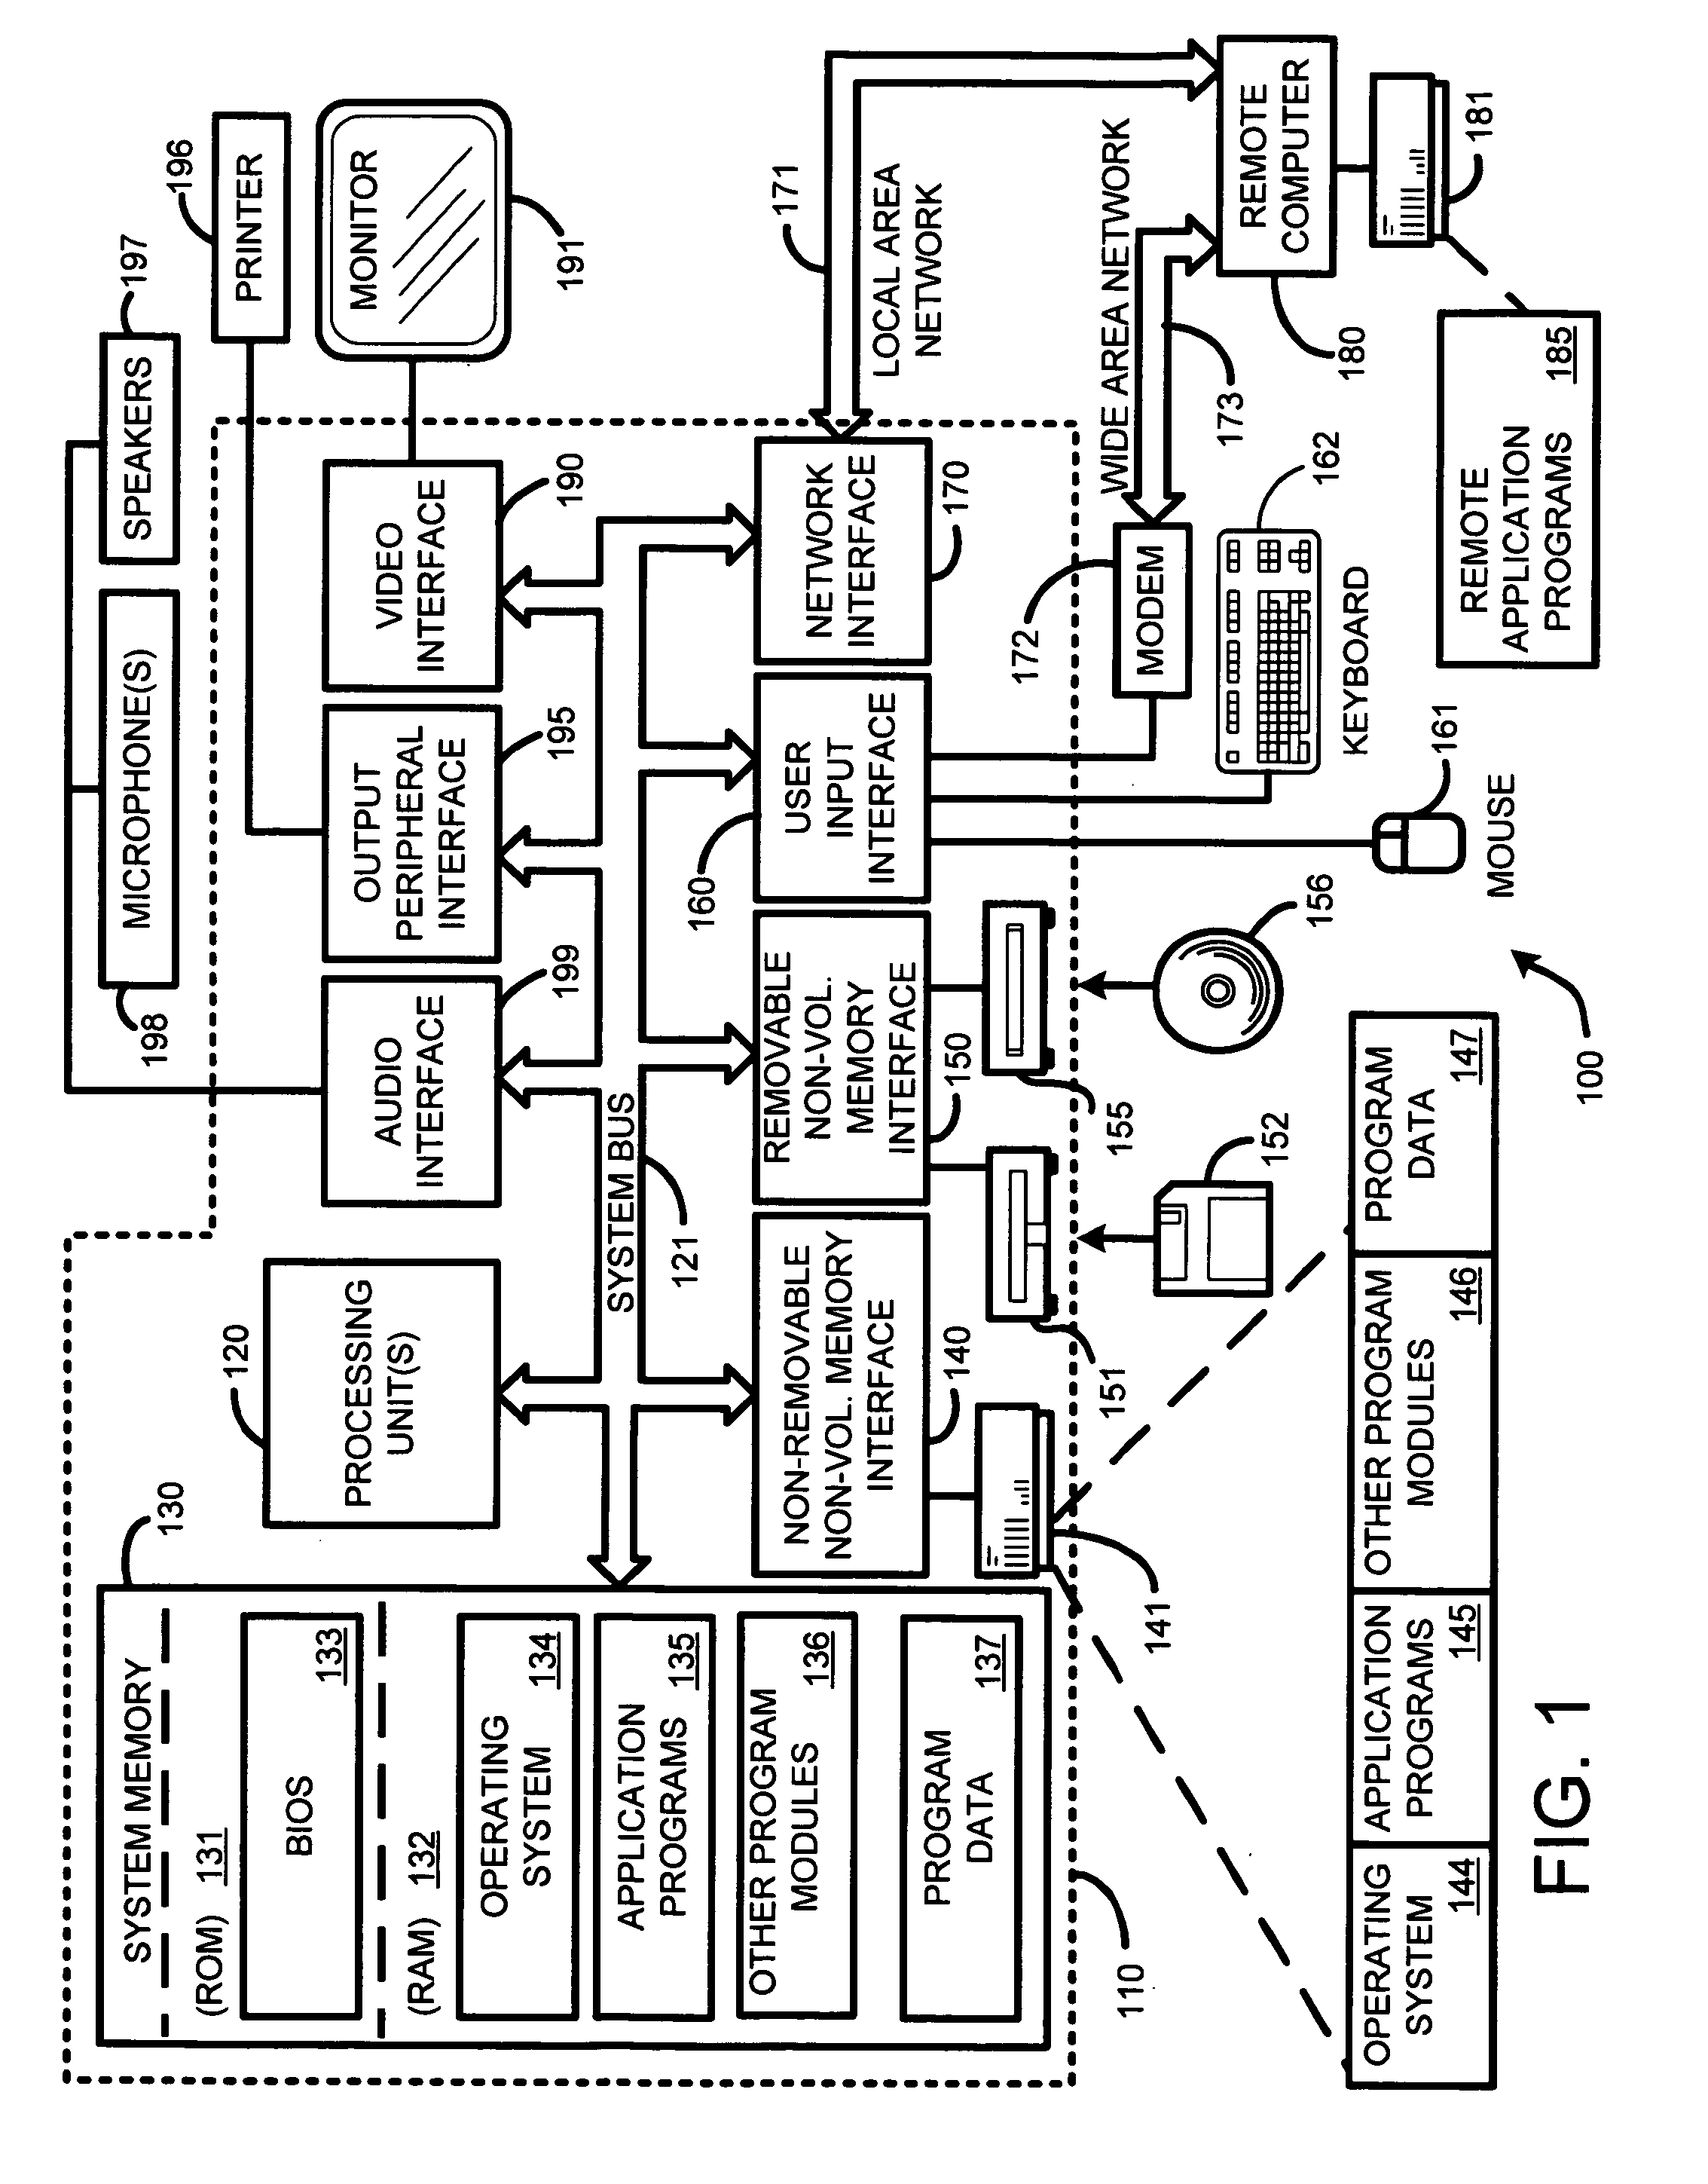 System and method for very low frame rate teleconferencing employing image morphing and cropping